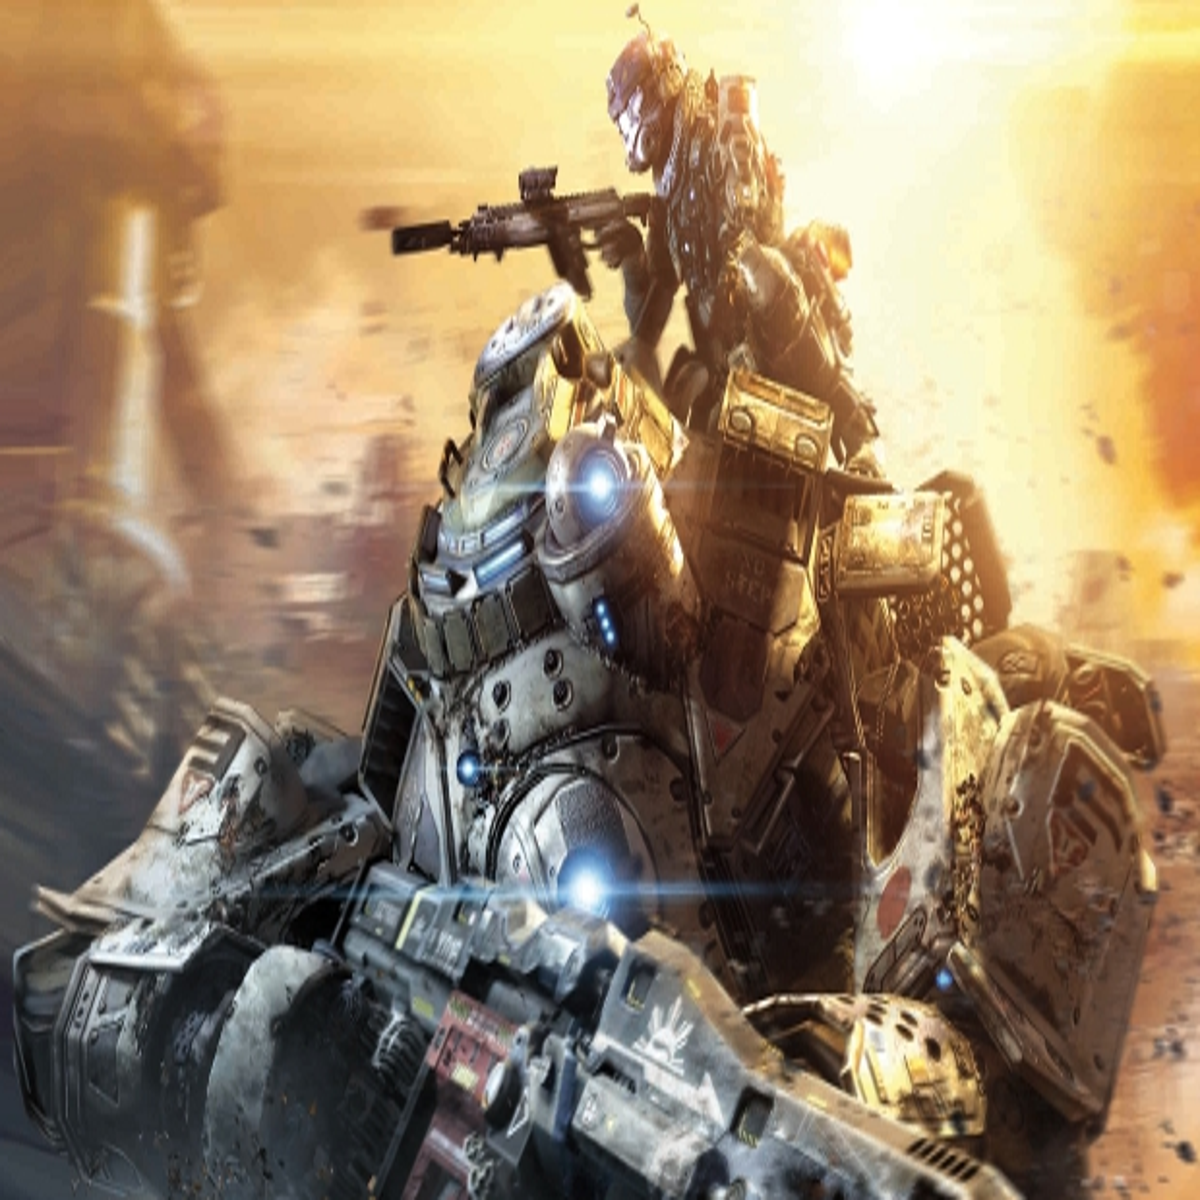 Titanfall 2 fans think Respawn is teasing something